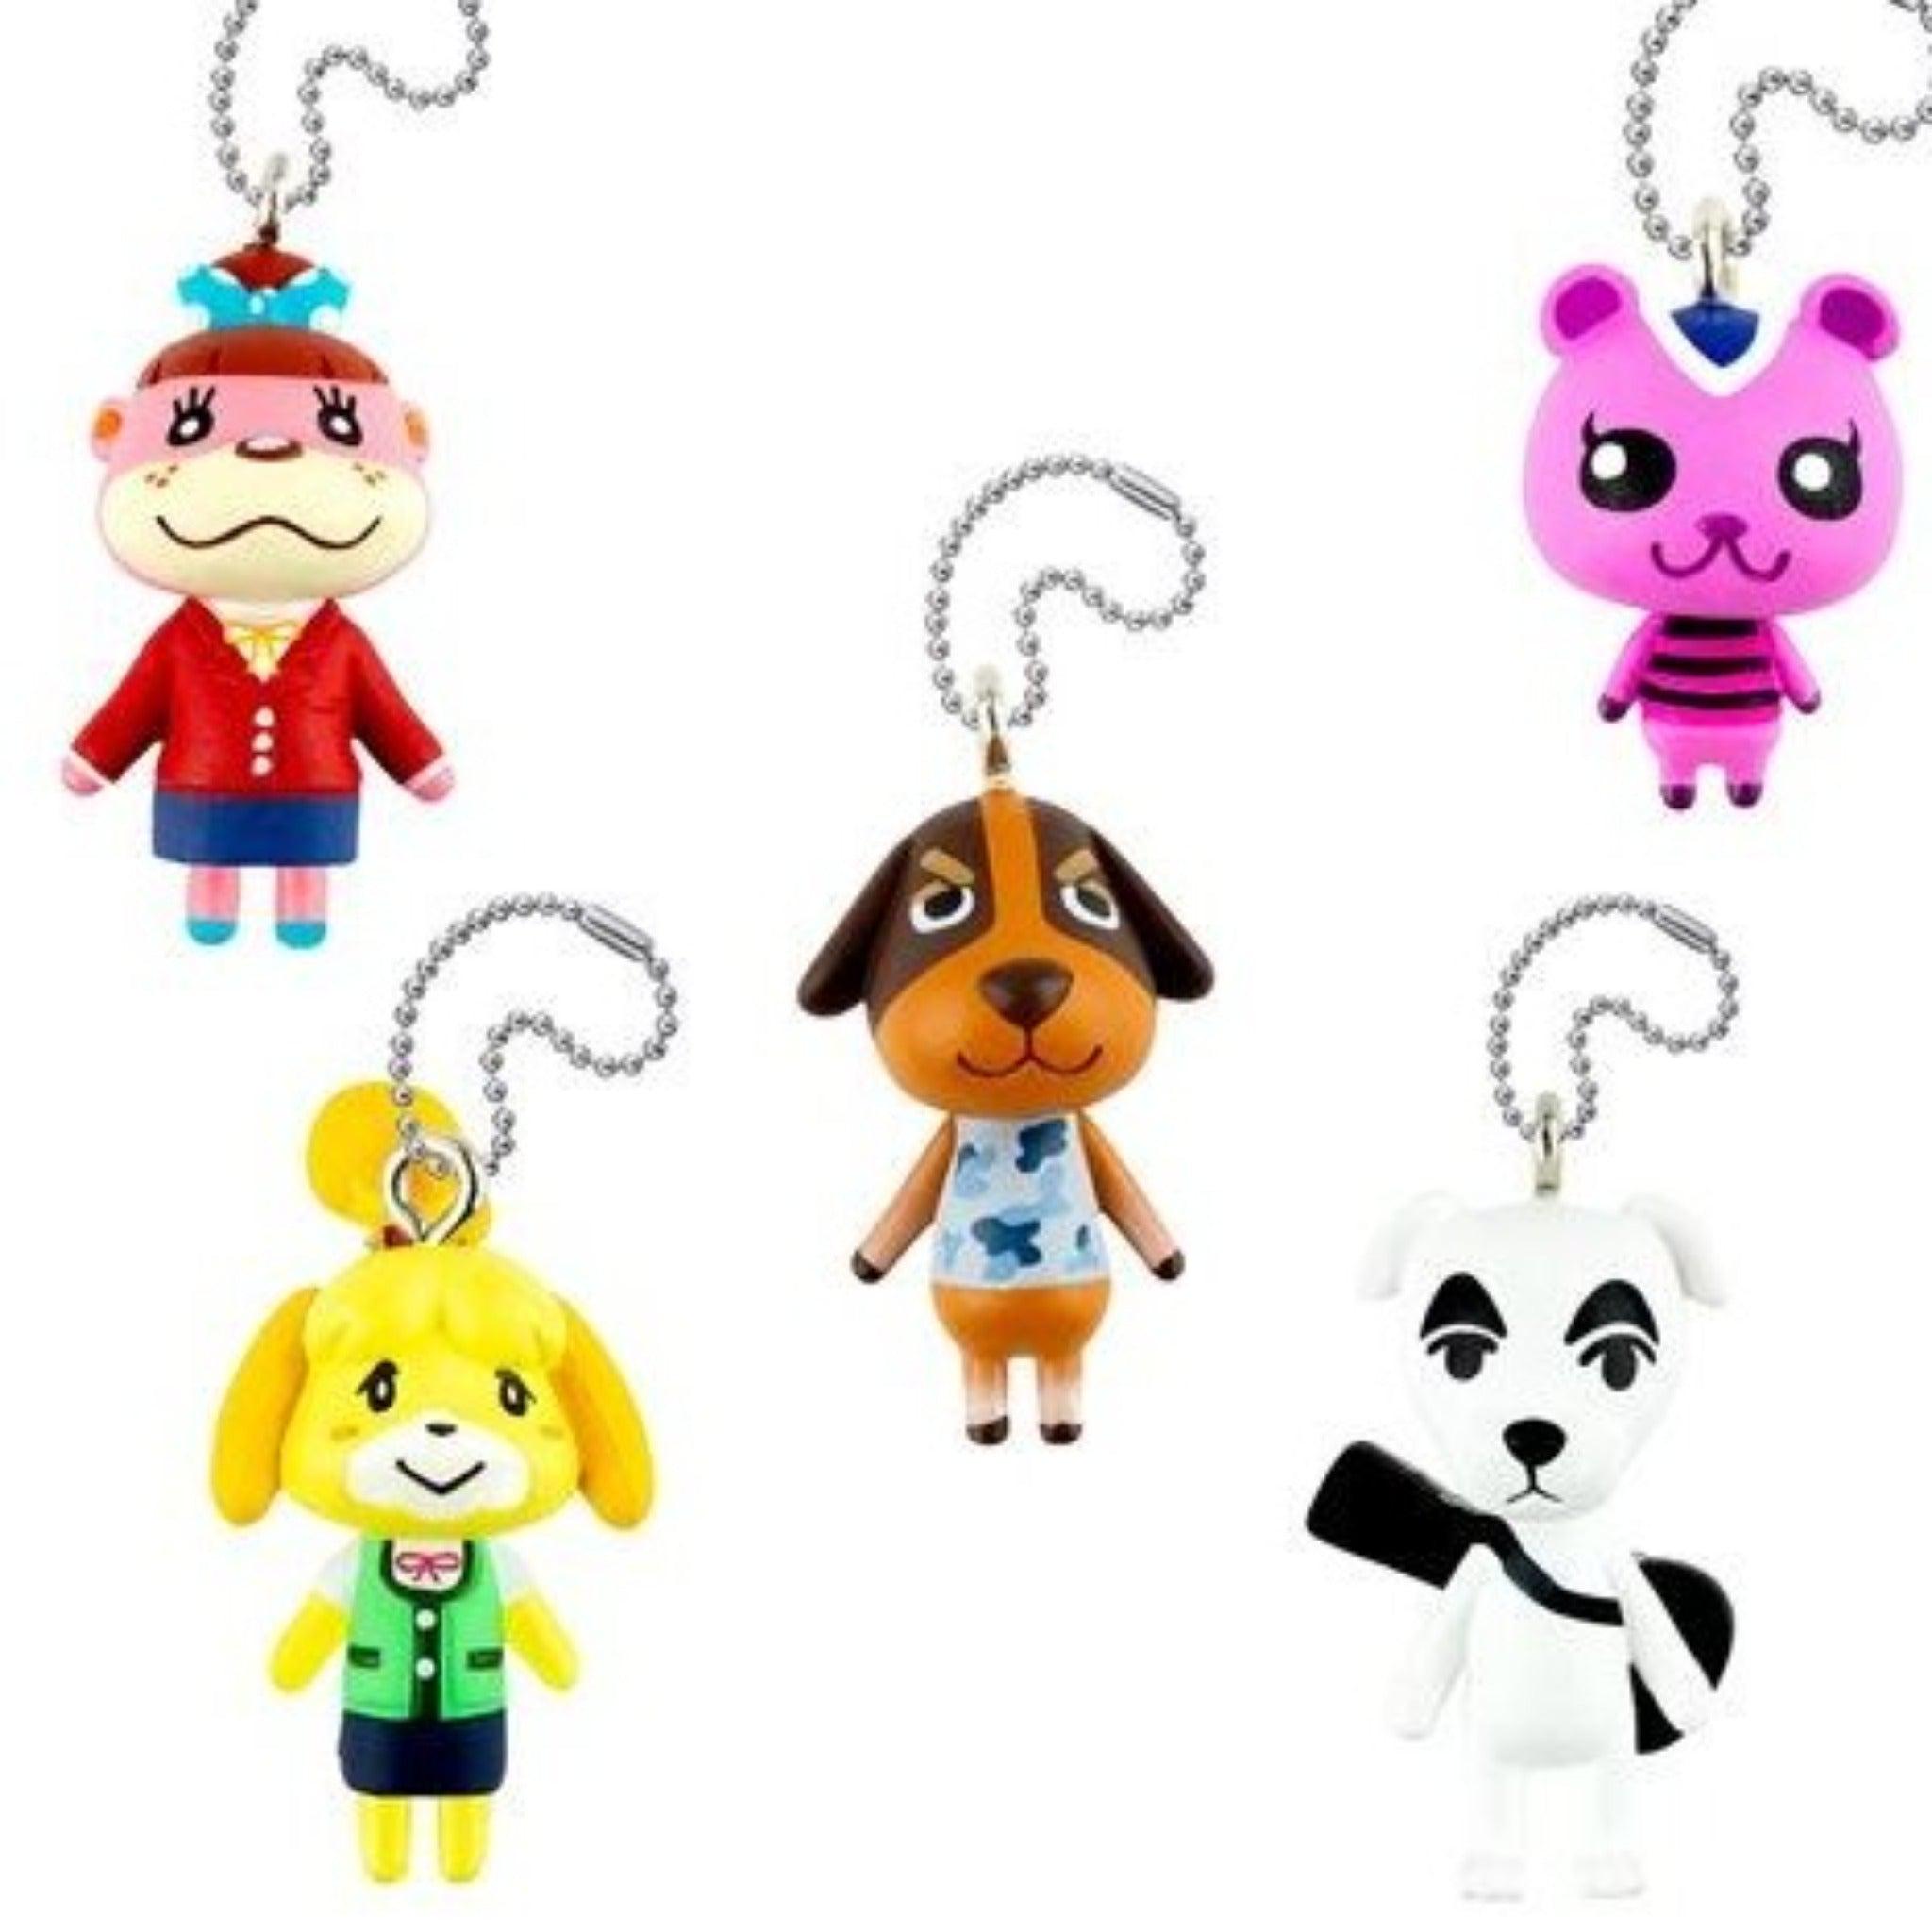 TOMY-Gachapon Animal Crossing Danglers - Assorted Styles-L67923A-Legacy Toys